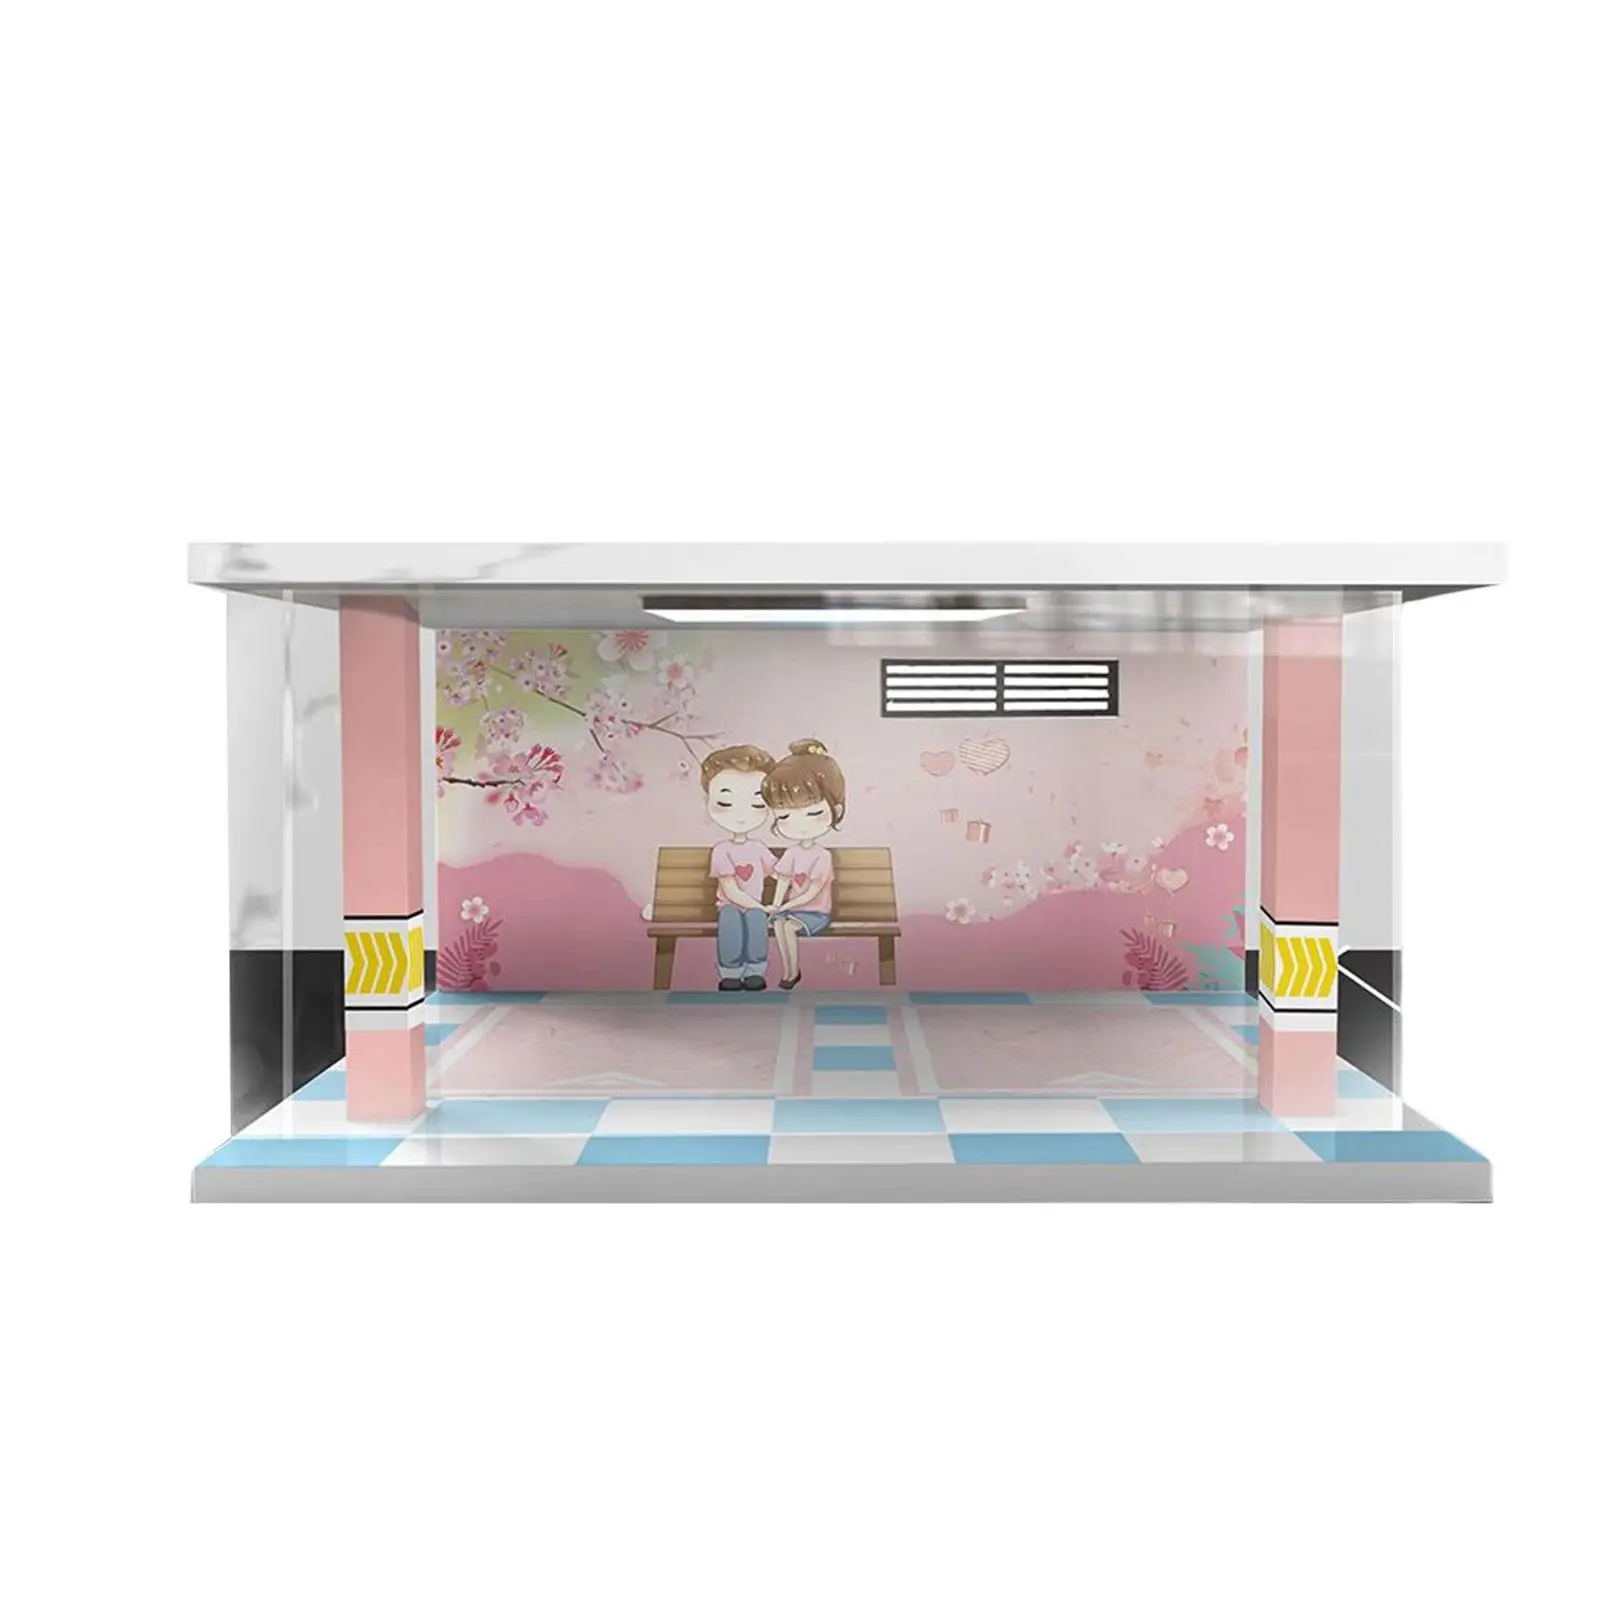 Clear Collectible Display Show Case with LED Lighting Garage and Acylic Cover Parking Lot Scene Background for 1/24 Diecast Cars